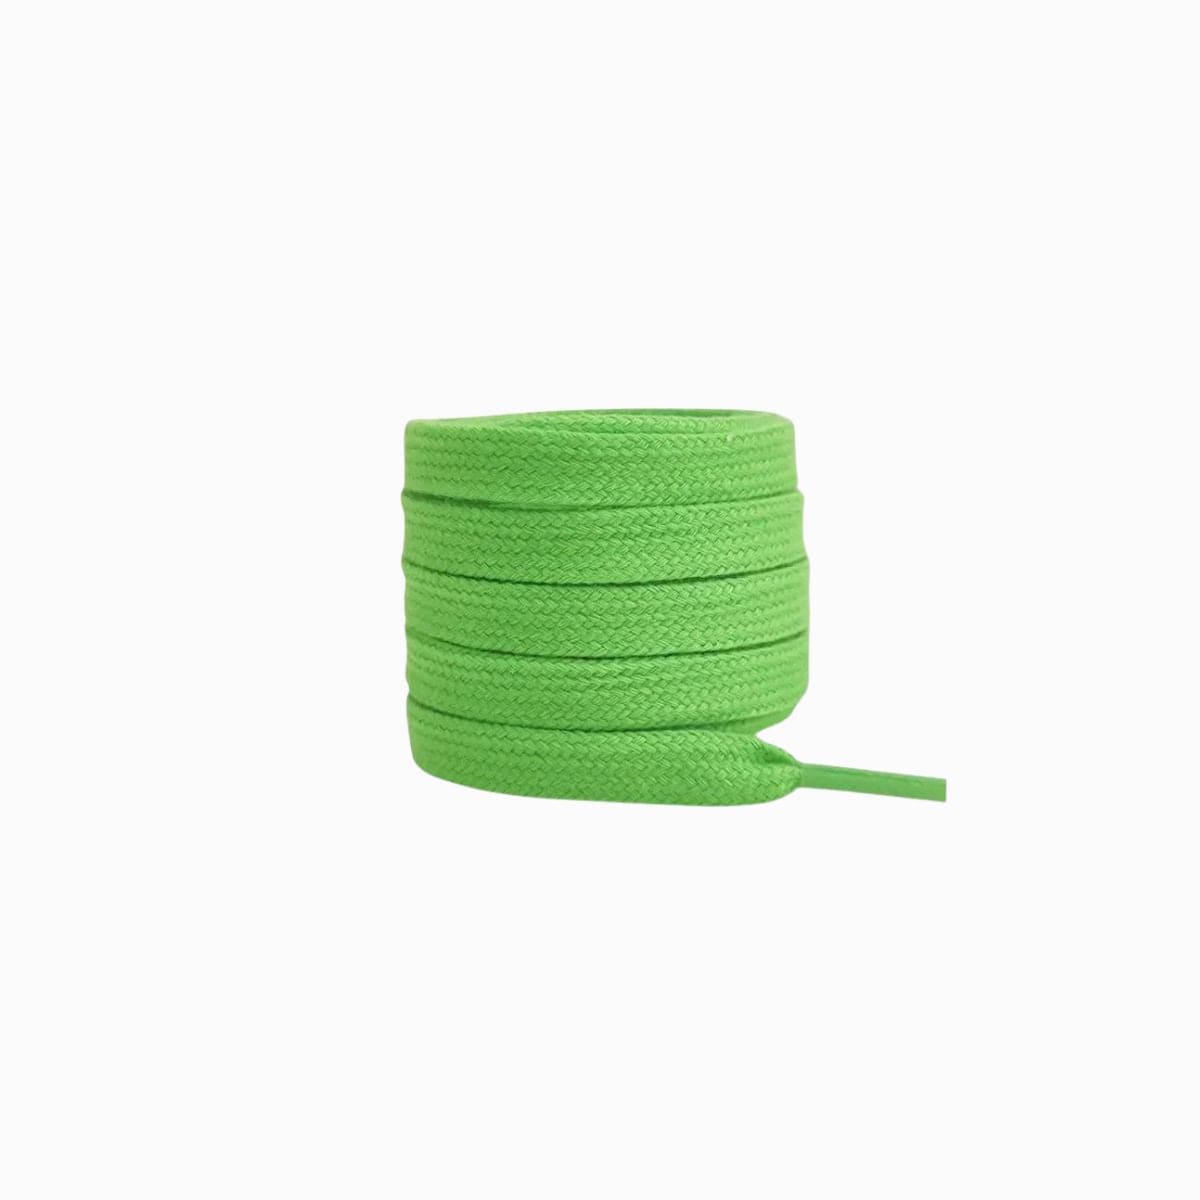 Green Replacement Adidas Shoe Laces for Adidas Samba ADV Sneakers by Kicks Shoelaces